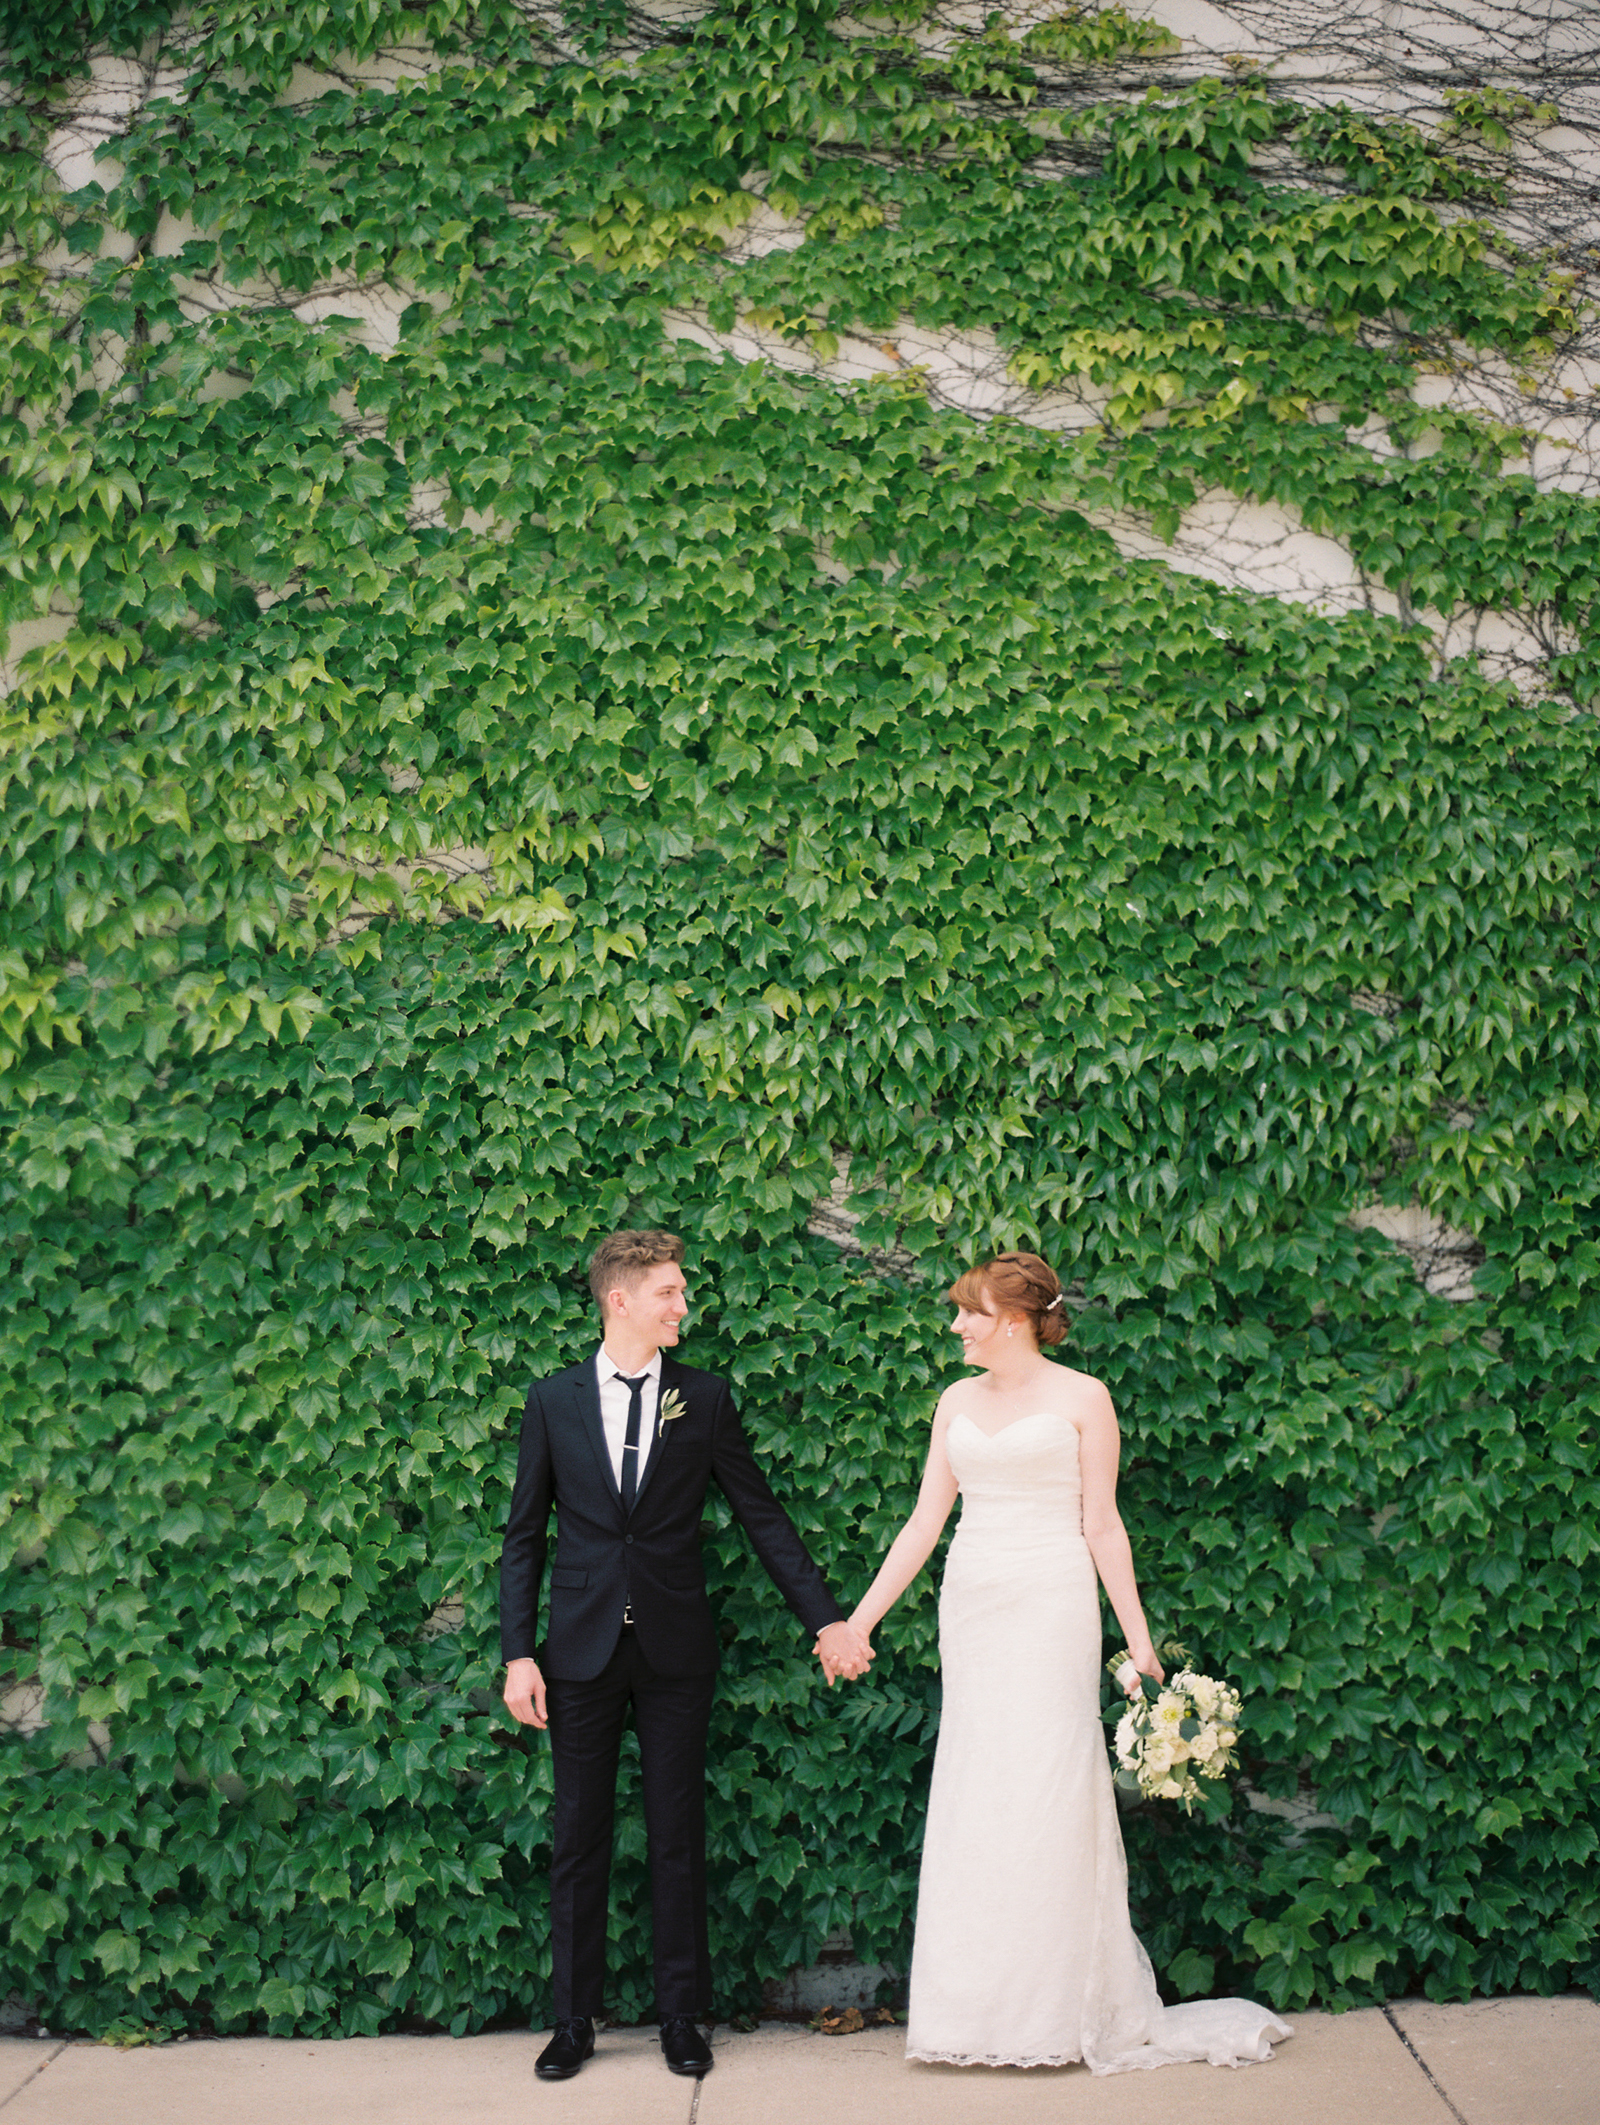 Bride and groom against vine covered wall with white bouquet of dahlias, garden roses, and eucalyptus.